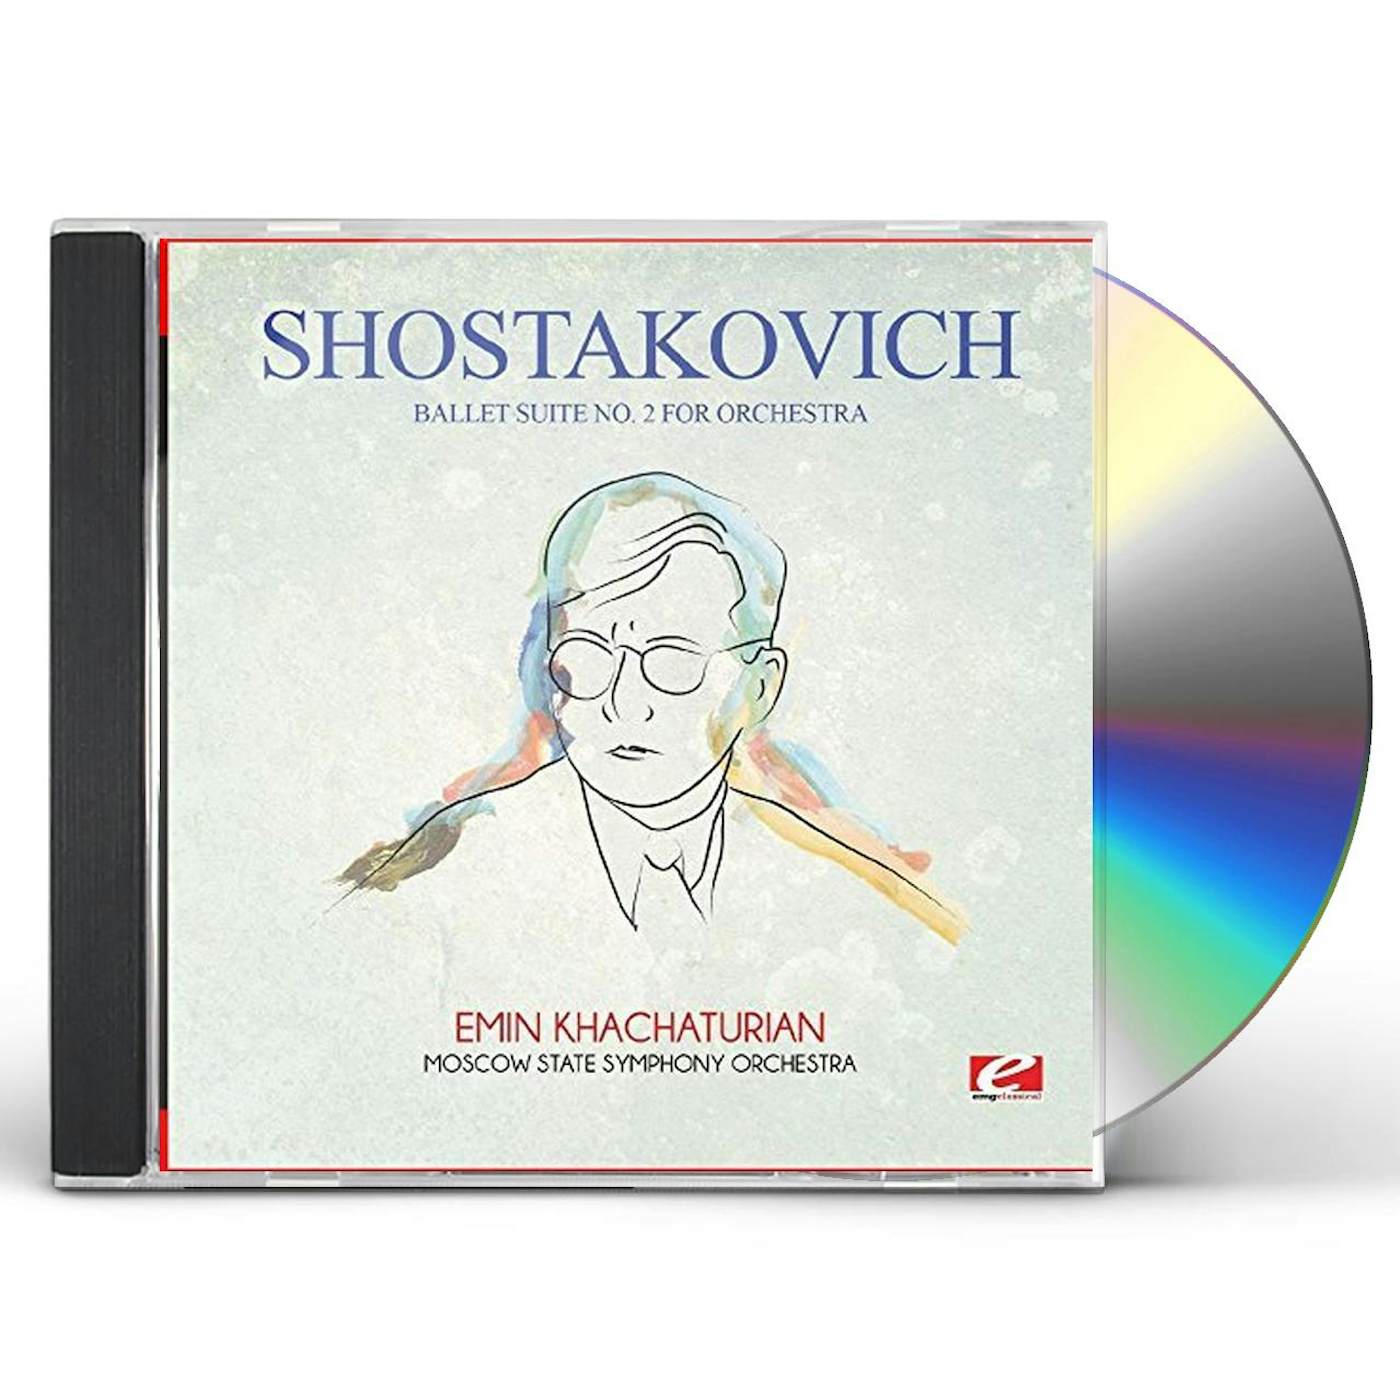 Shostakovich BALLET SUITE NO. 2 FOR ORCHESTRA CD